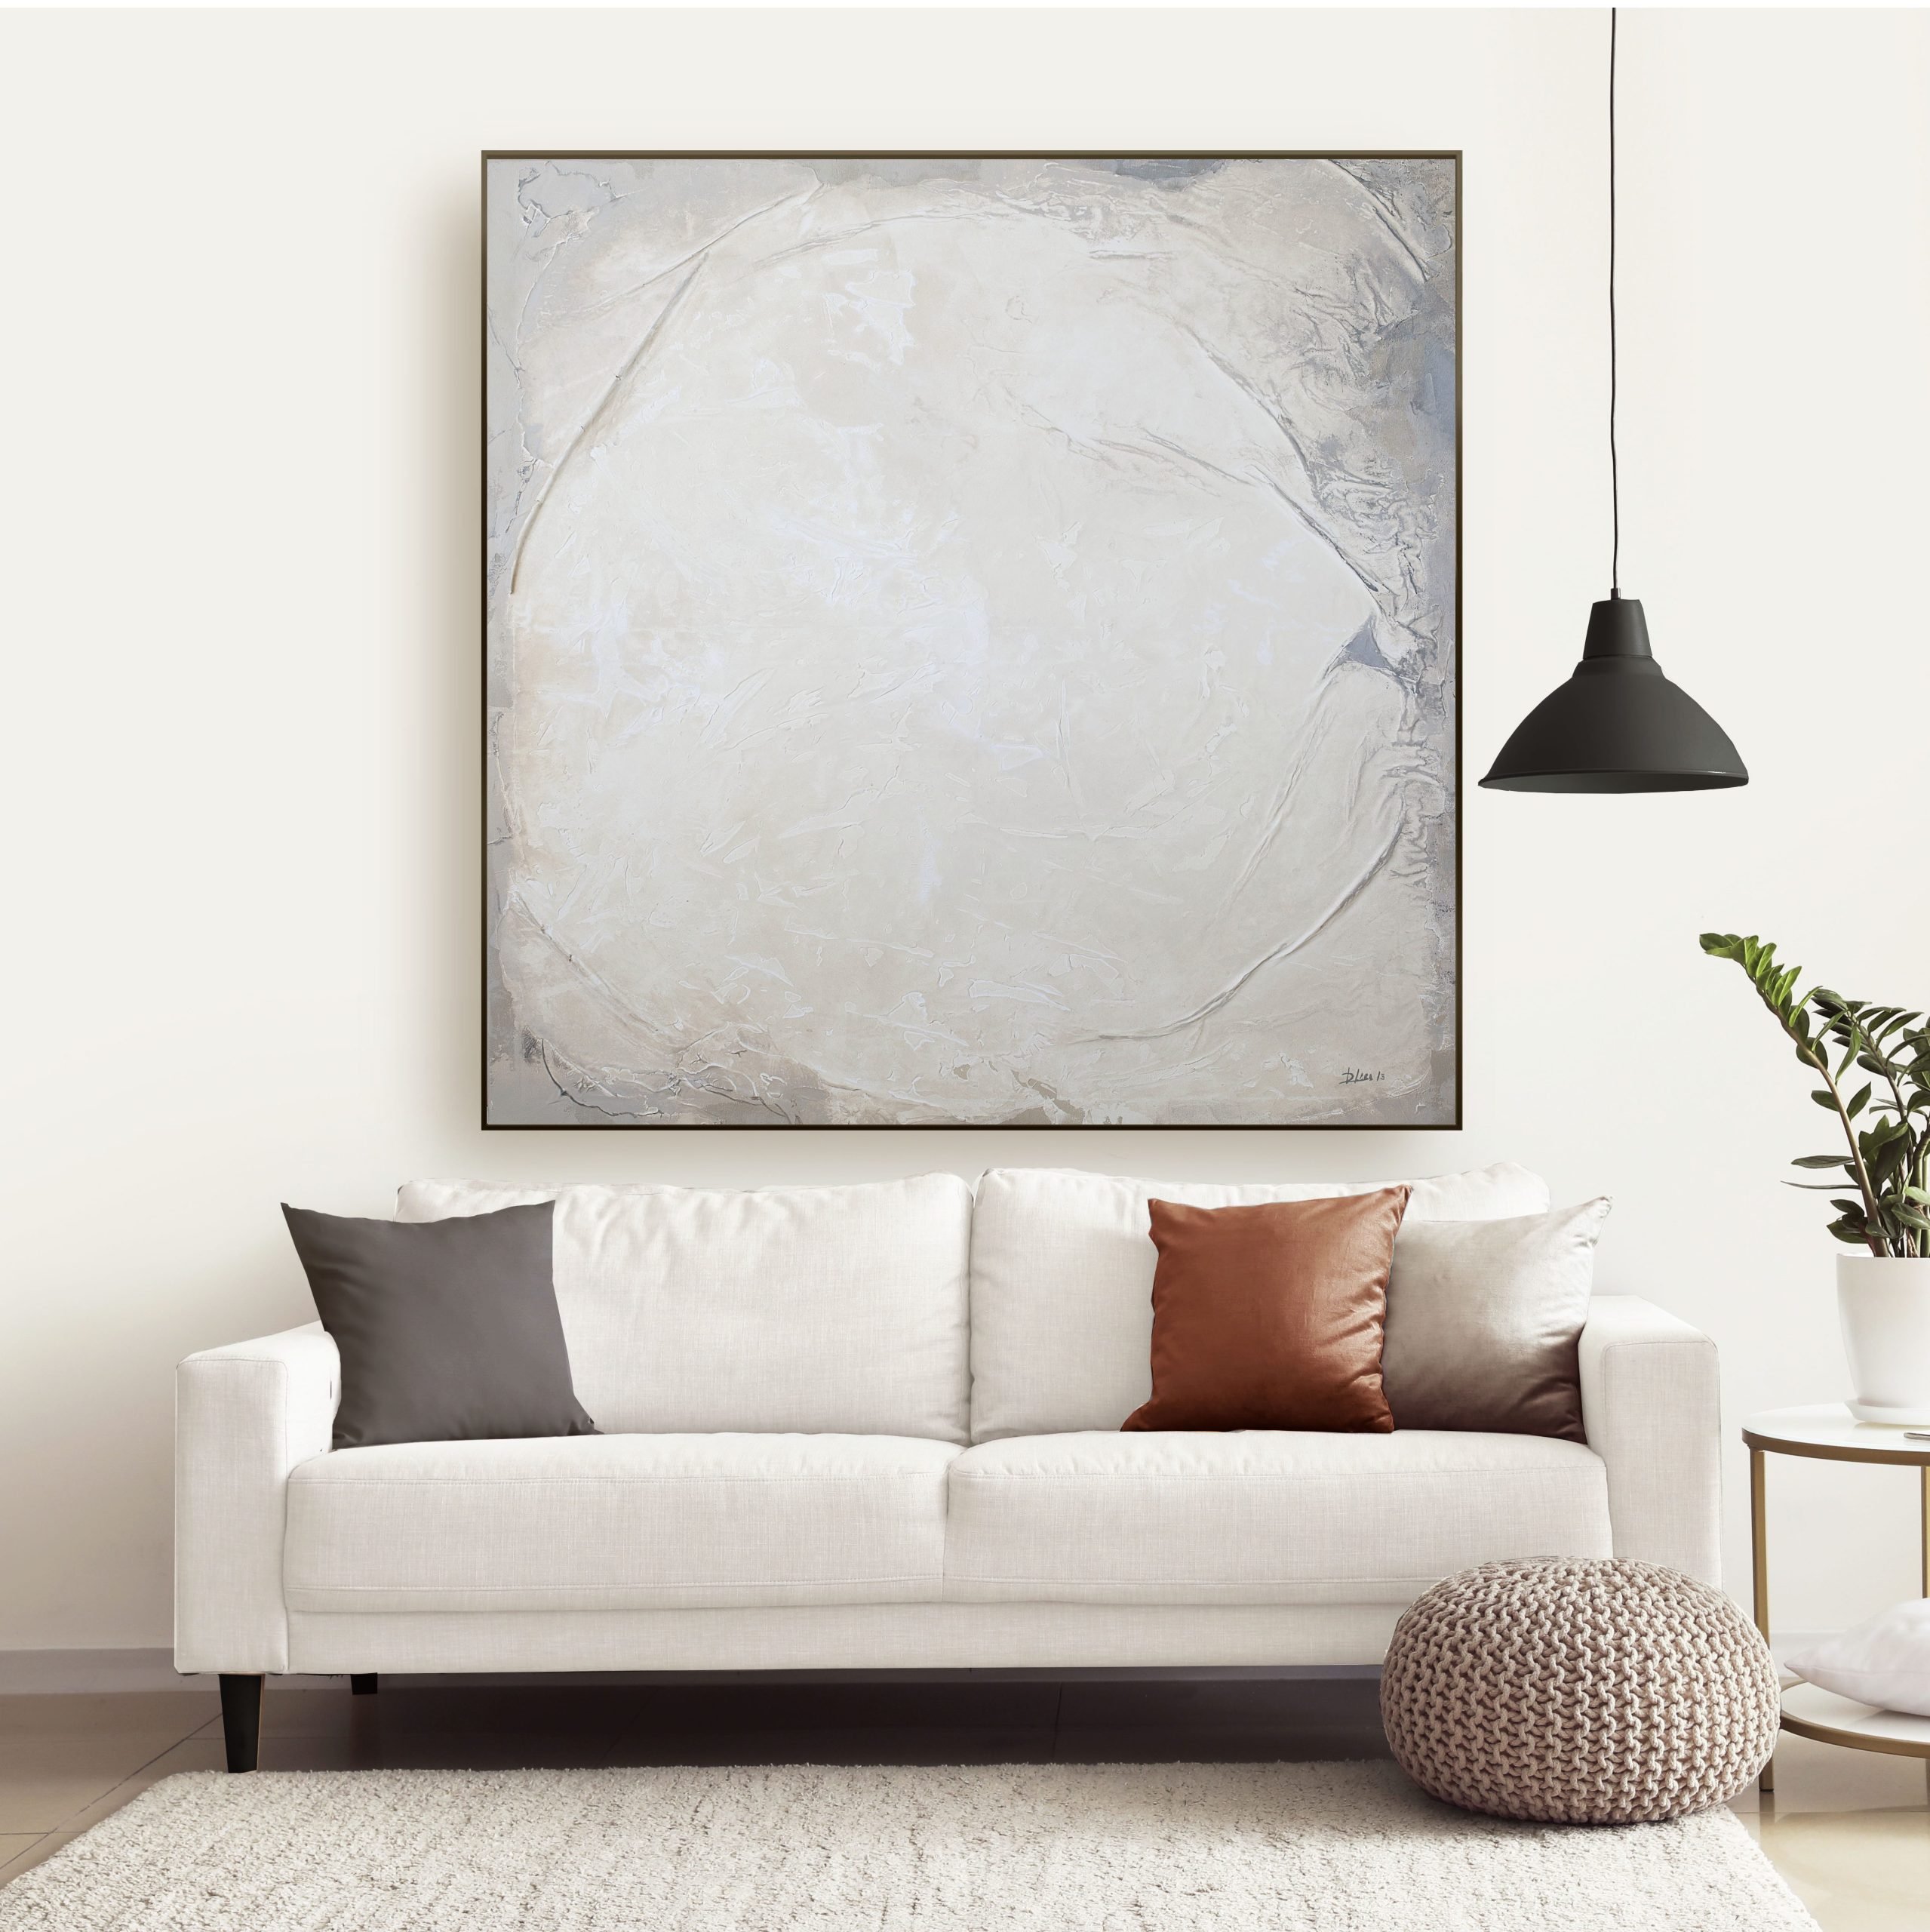 "Valle" minimalist abstract artwork 150 x 150 cms framed in Interior of modern room with comfortable sofa